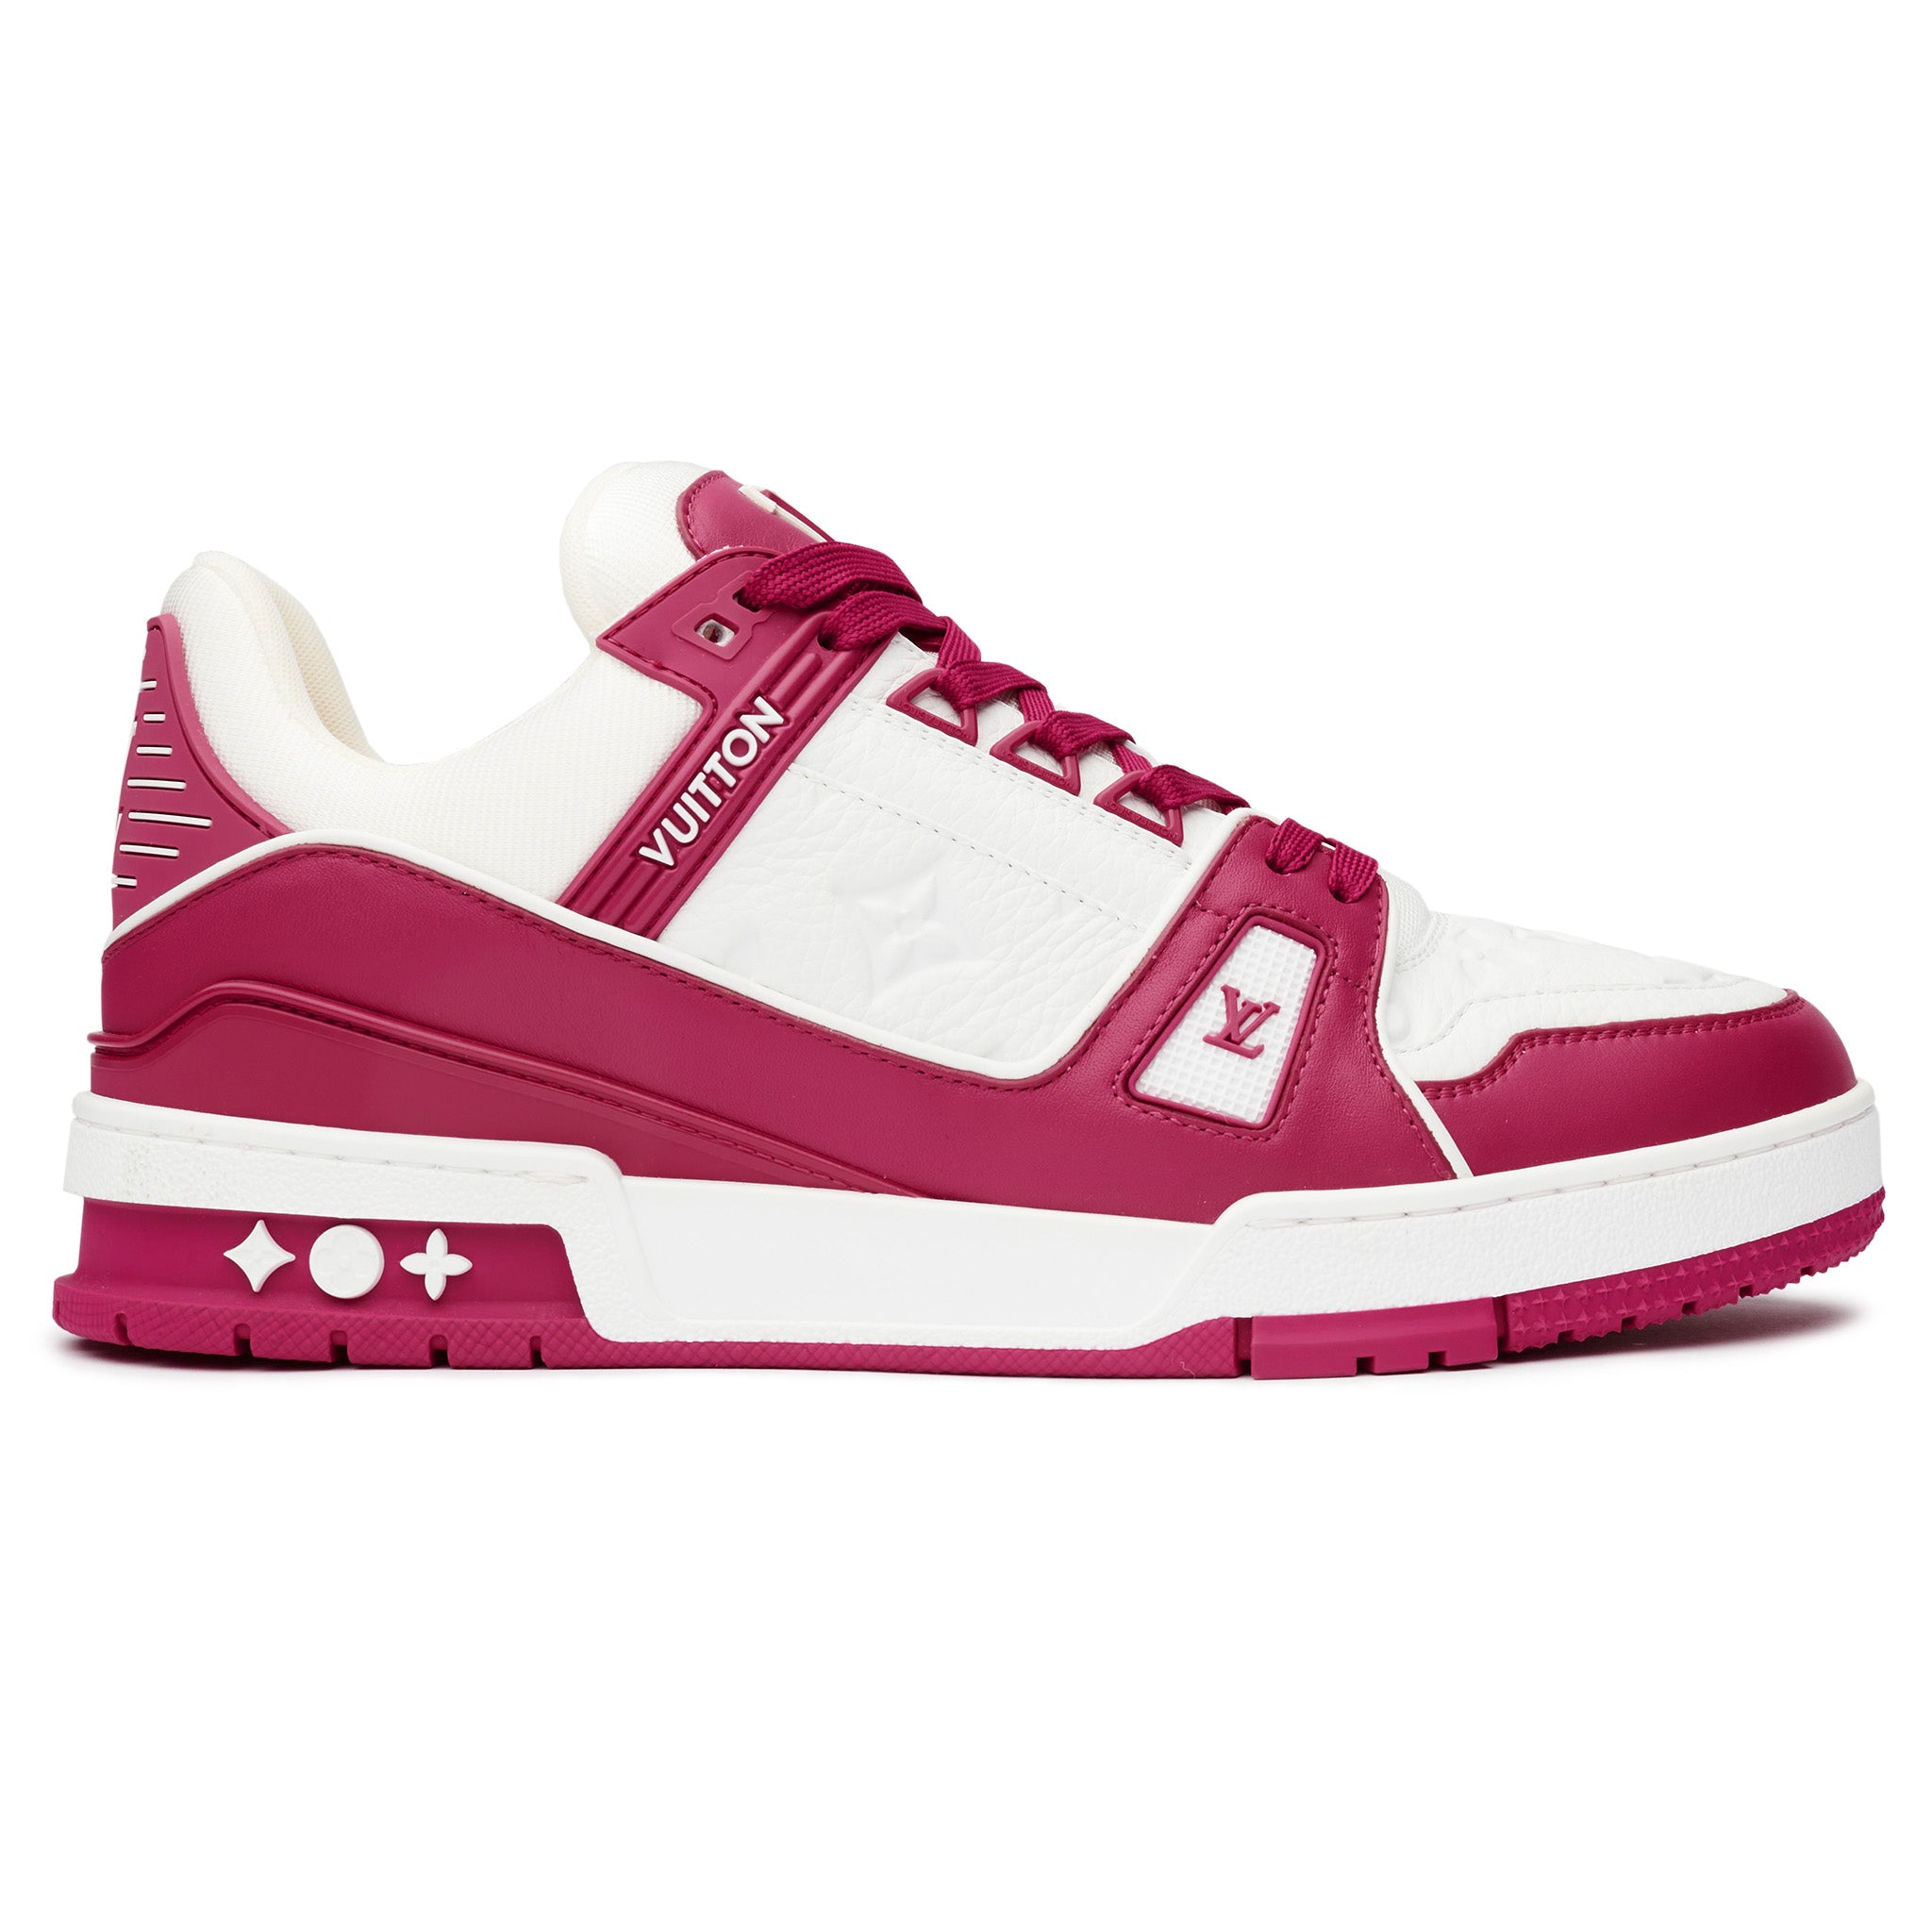 Archlight leather trainers Louis Vuitton Pink size 38 EU in